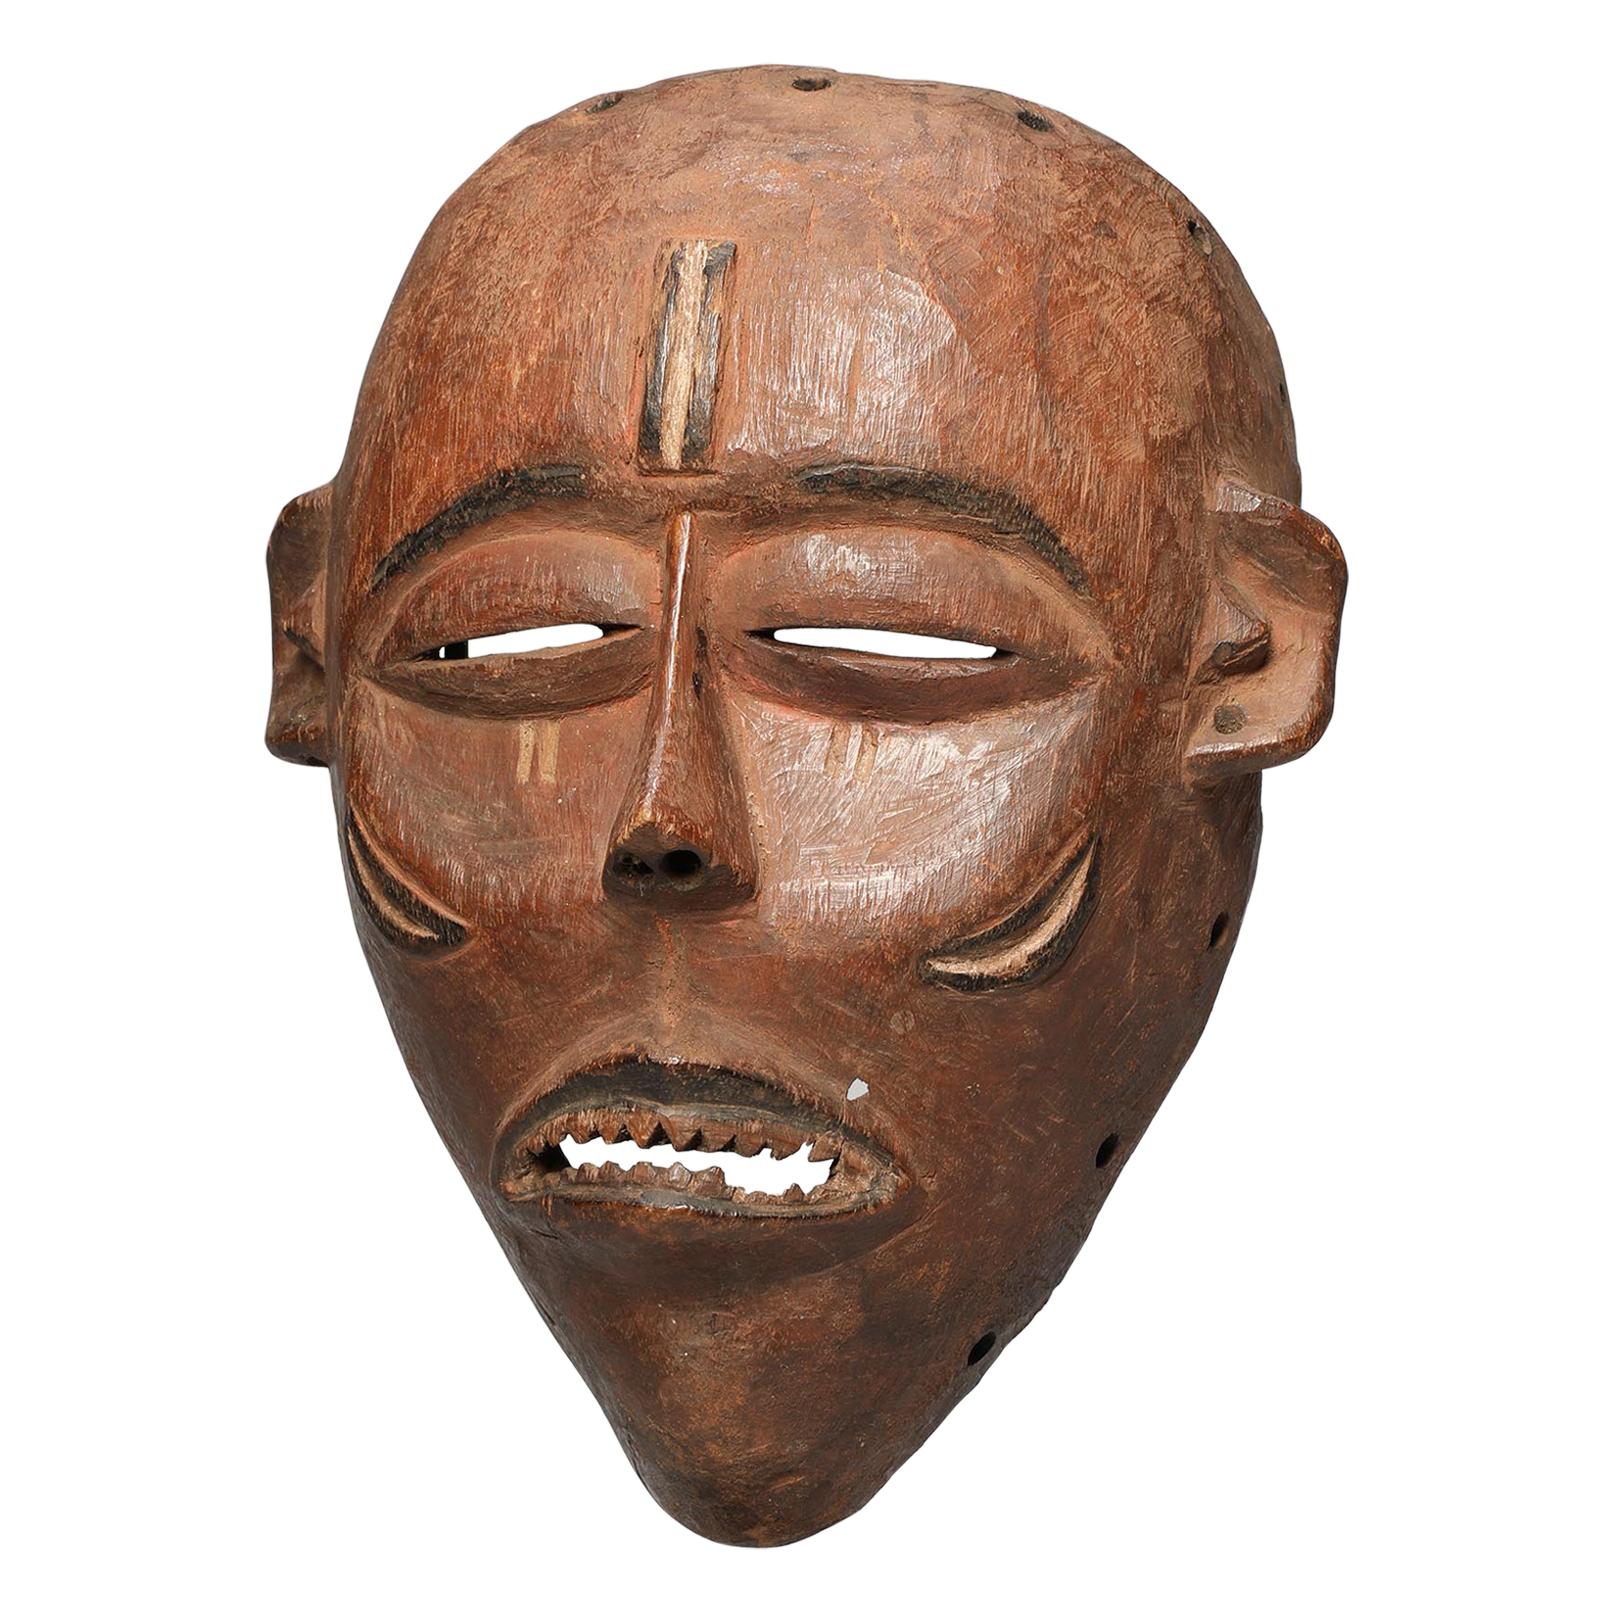 Early Hardwood Pende Dance Mask Early 20th Century DR Congo African Tribal Art For Sale